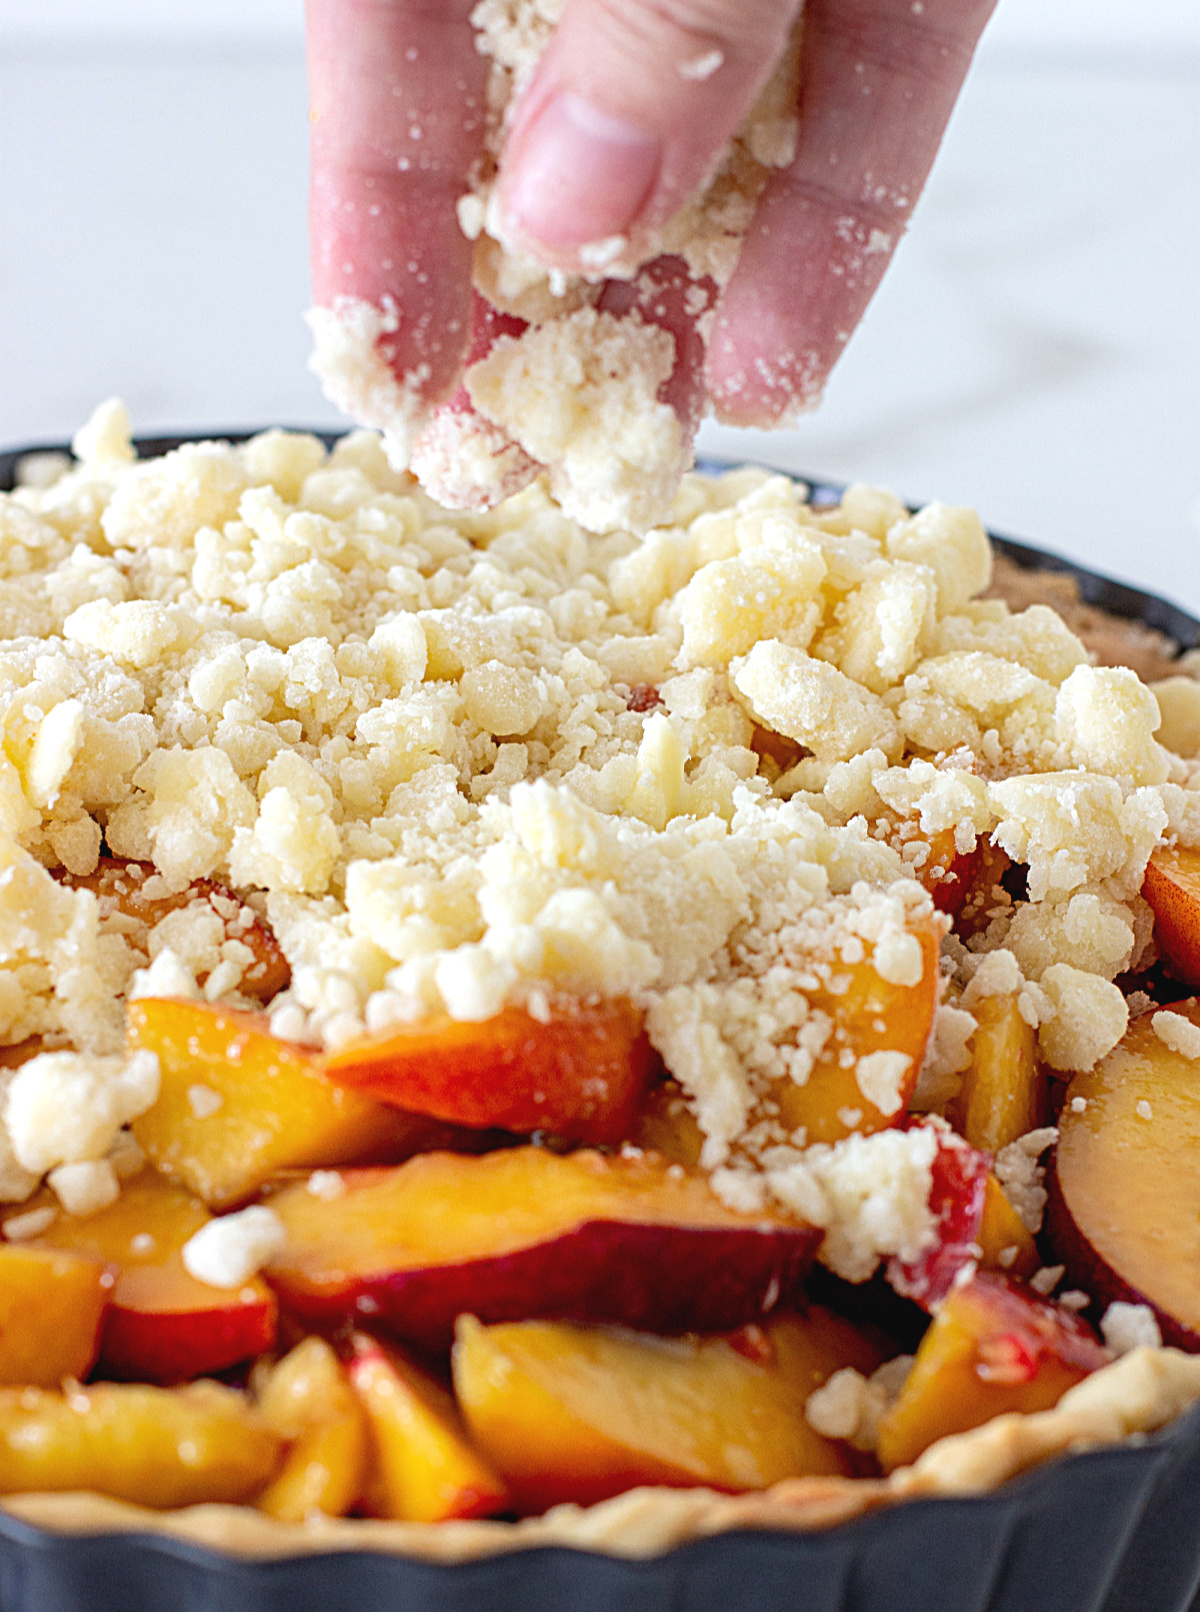 Hand adding crumble to peaches in pie metal pan.